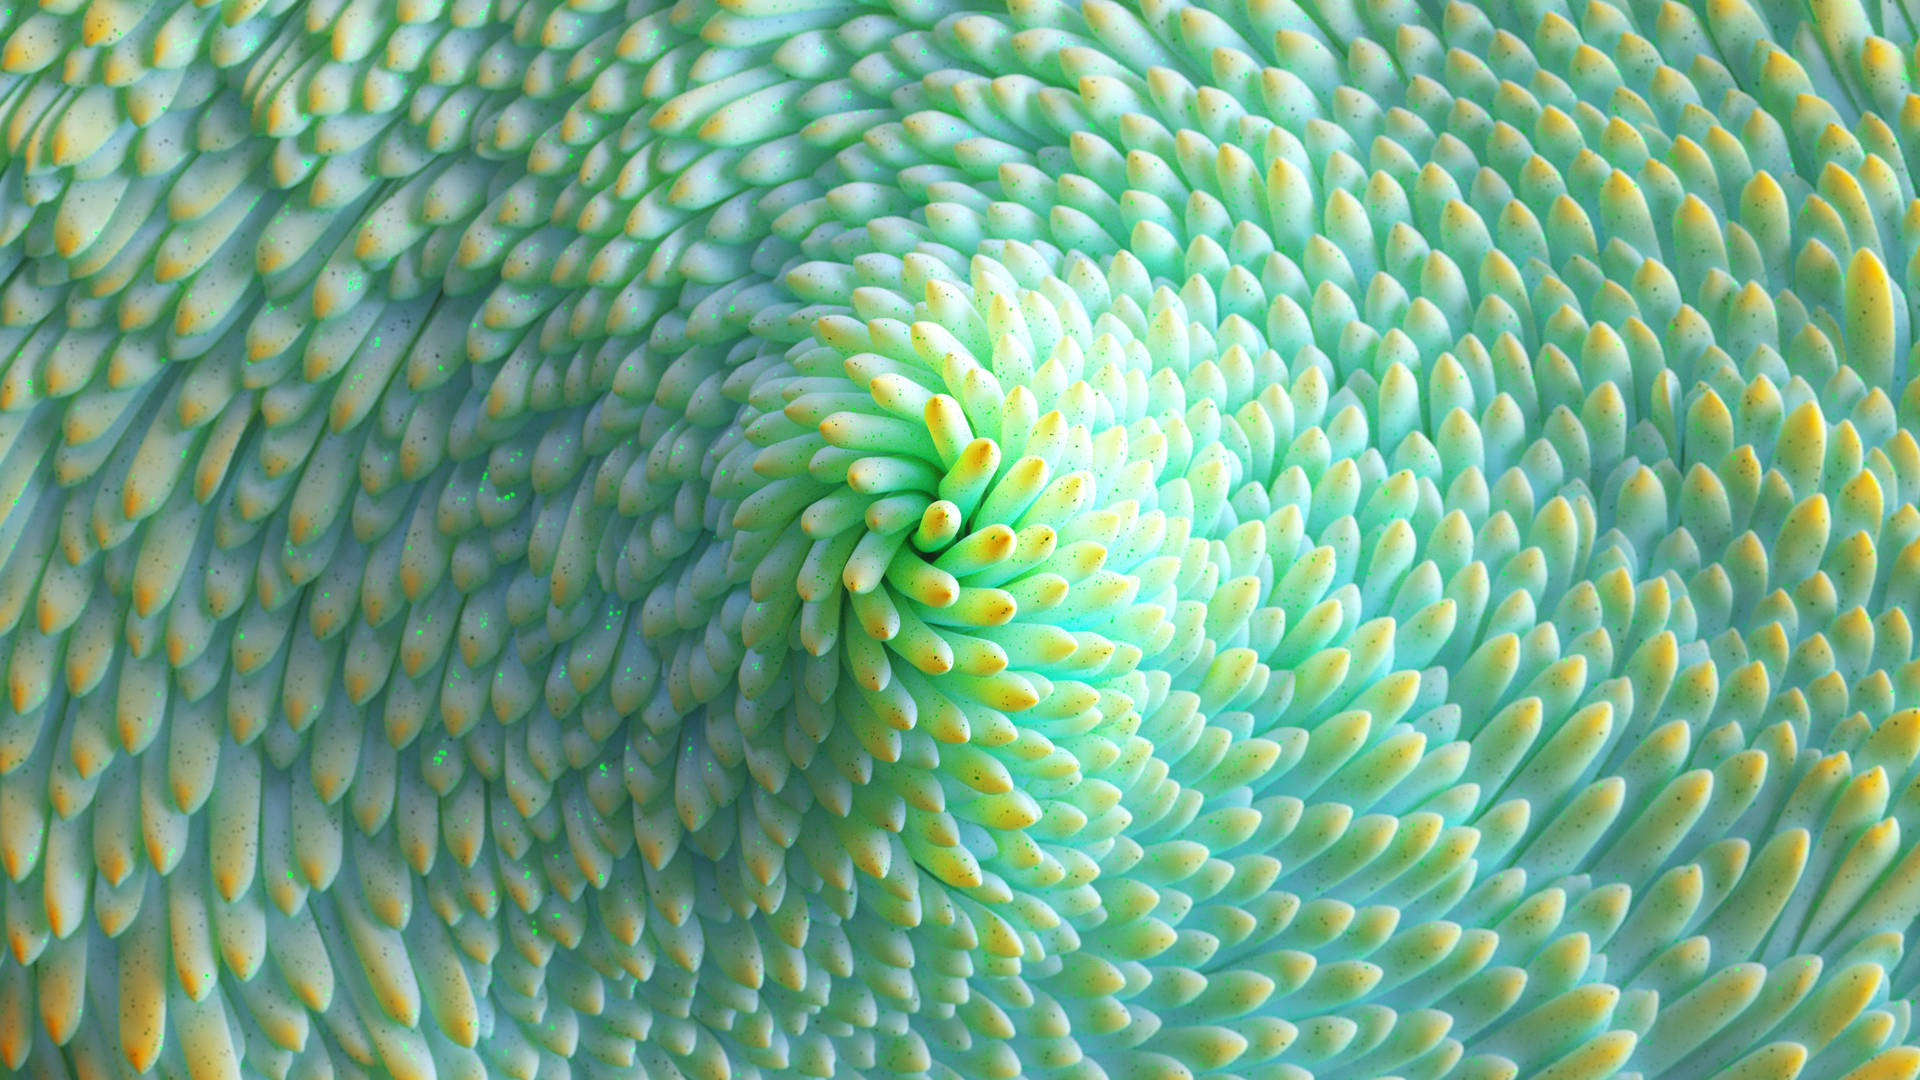 4d Ultra Hd Close-up Of Green Succulent Background